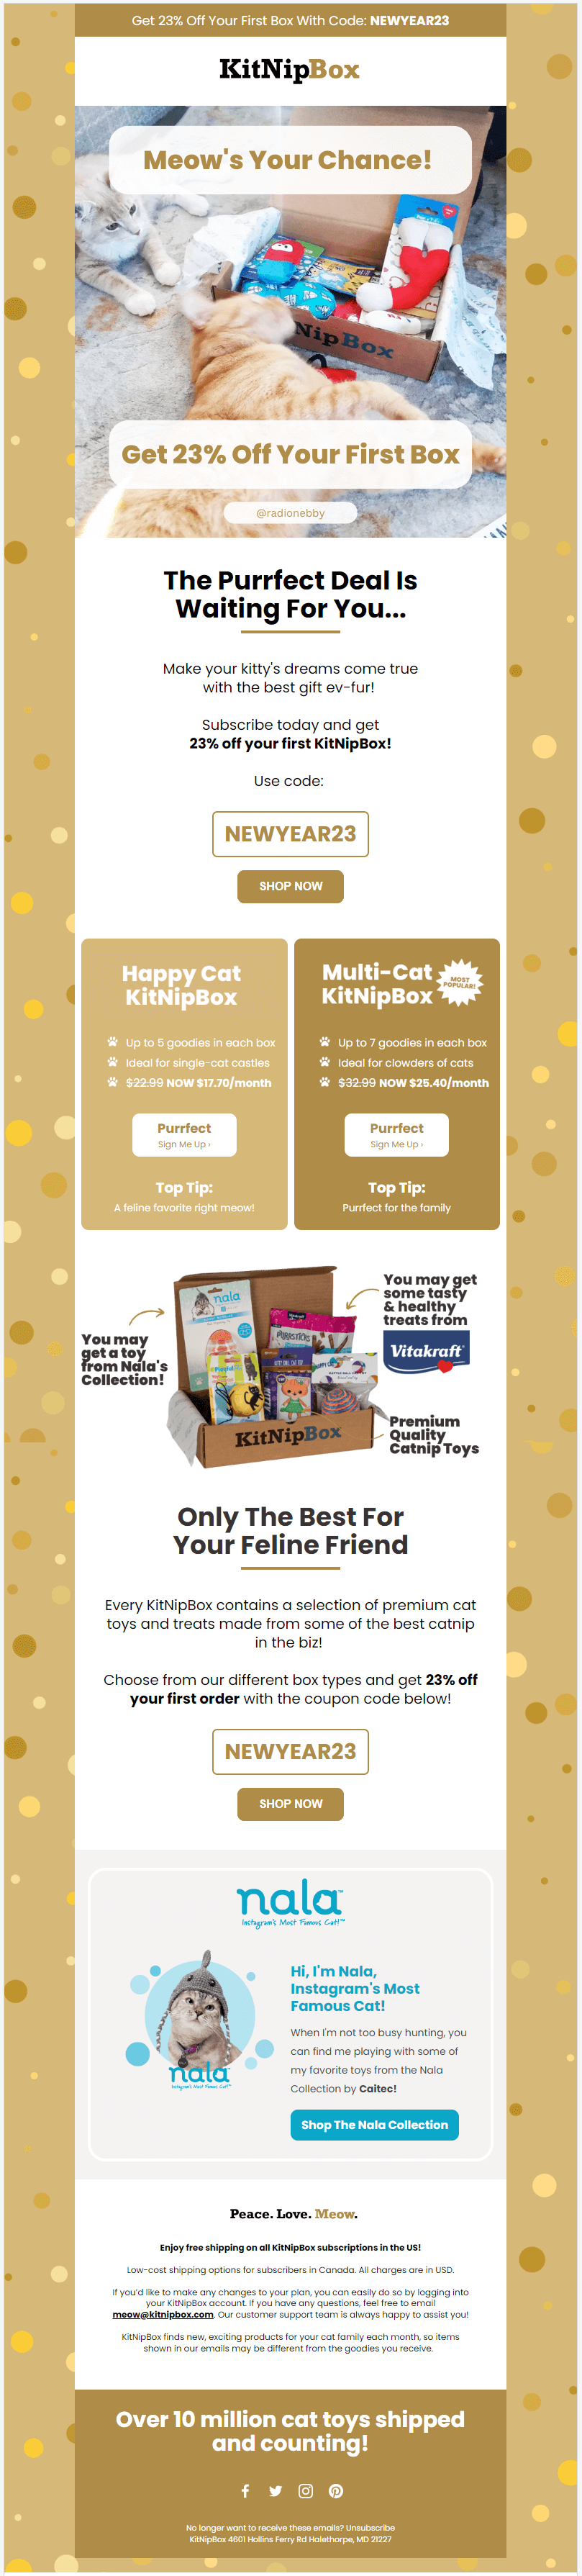 email example by pet brand KitNipBox